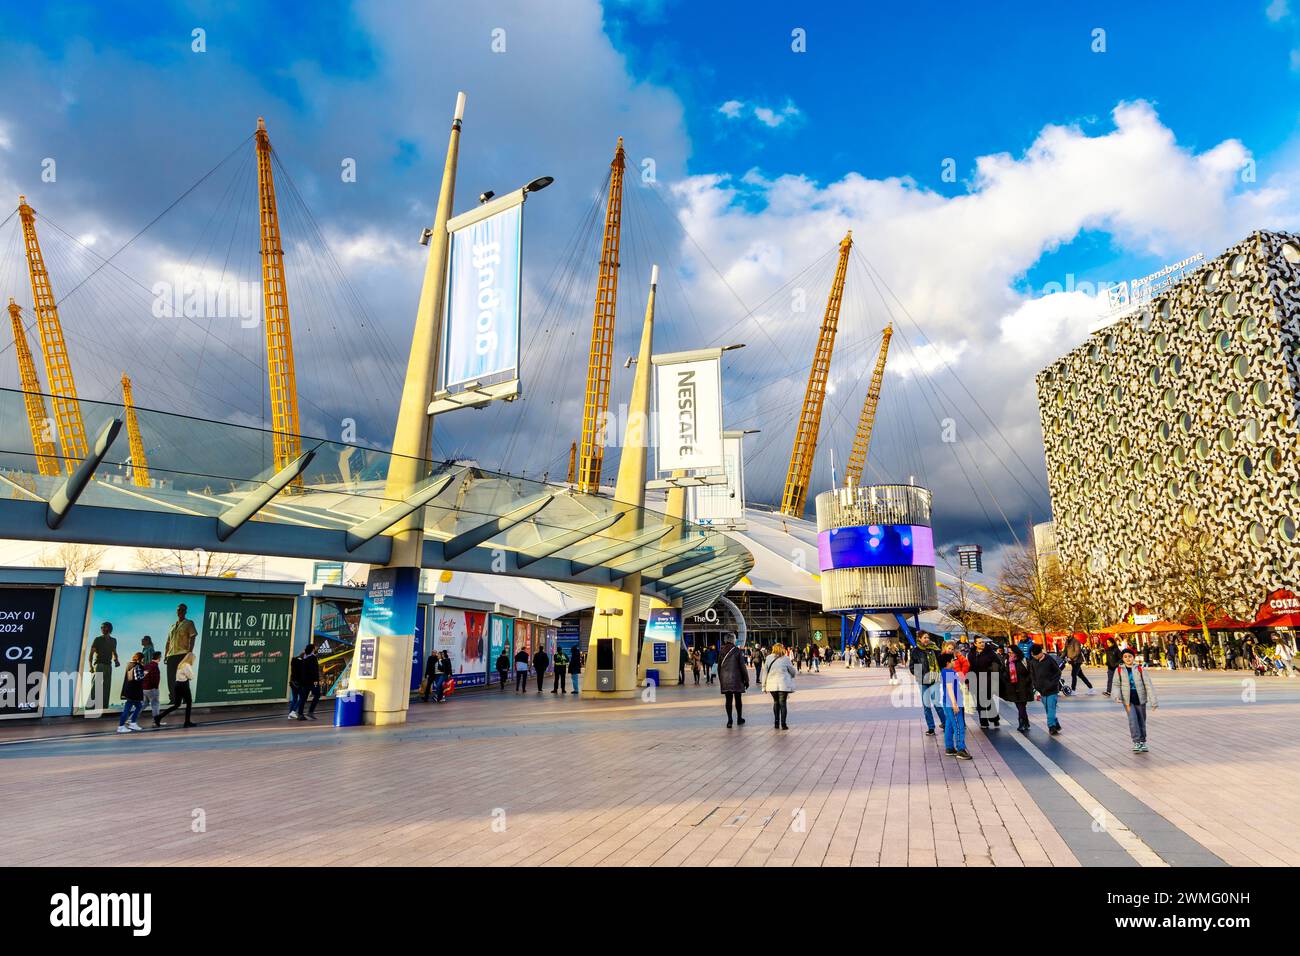 Peninsula Square et O2 Arena, North Greenwich, Londres, Angleterre Banque D'Images